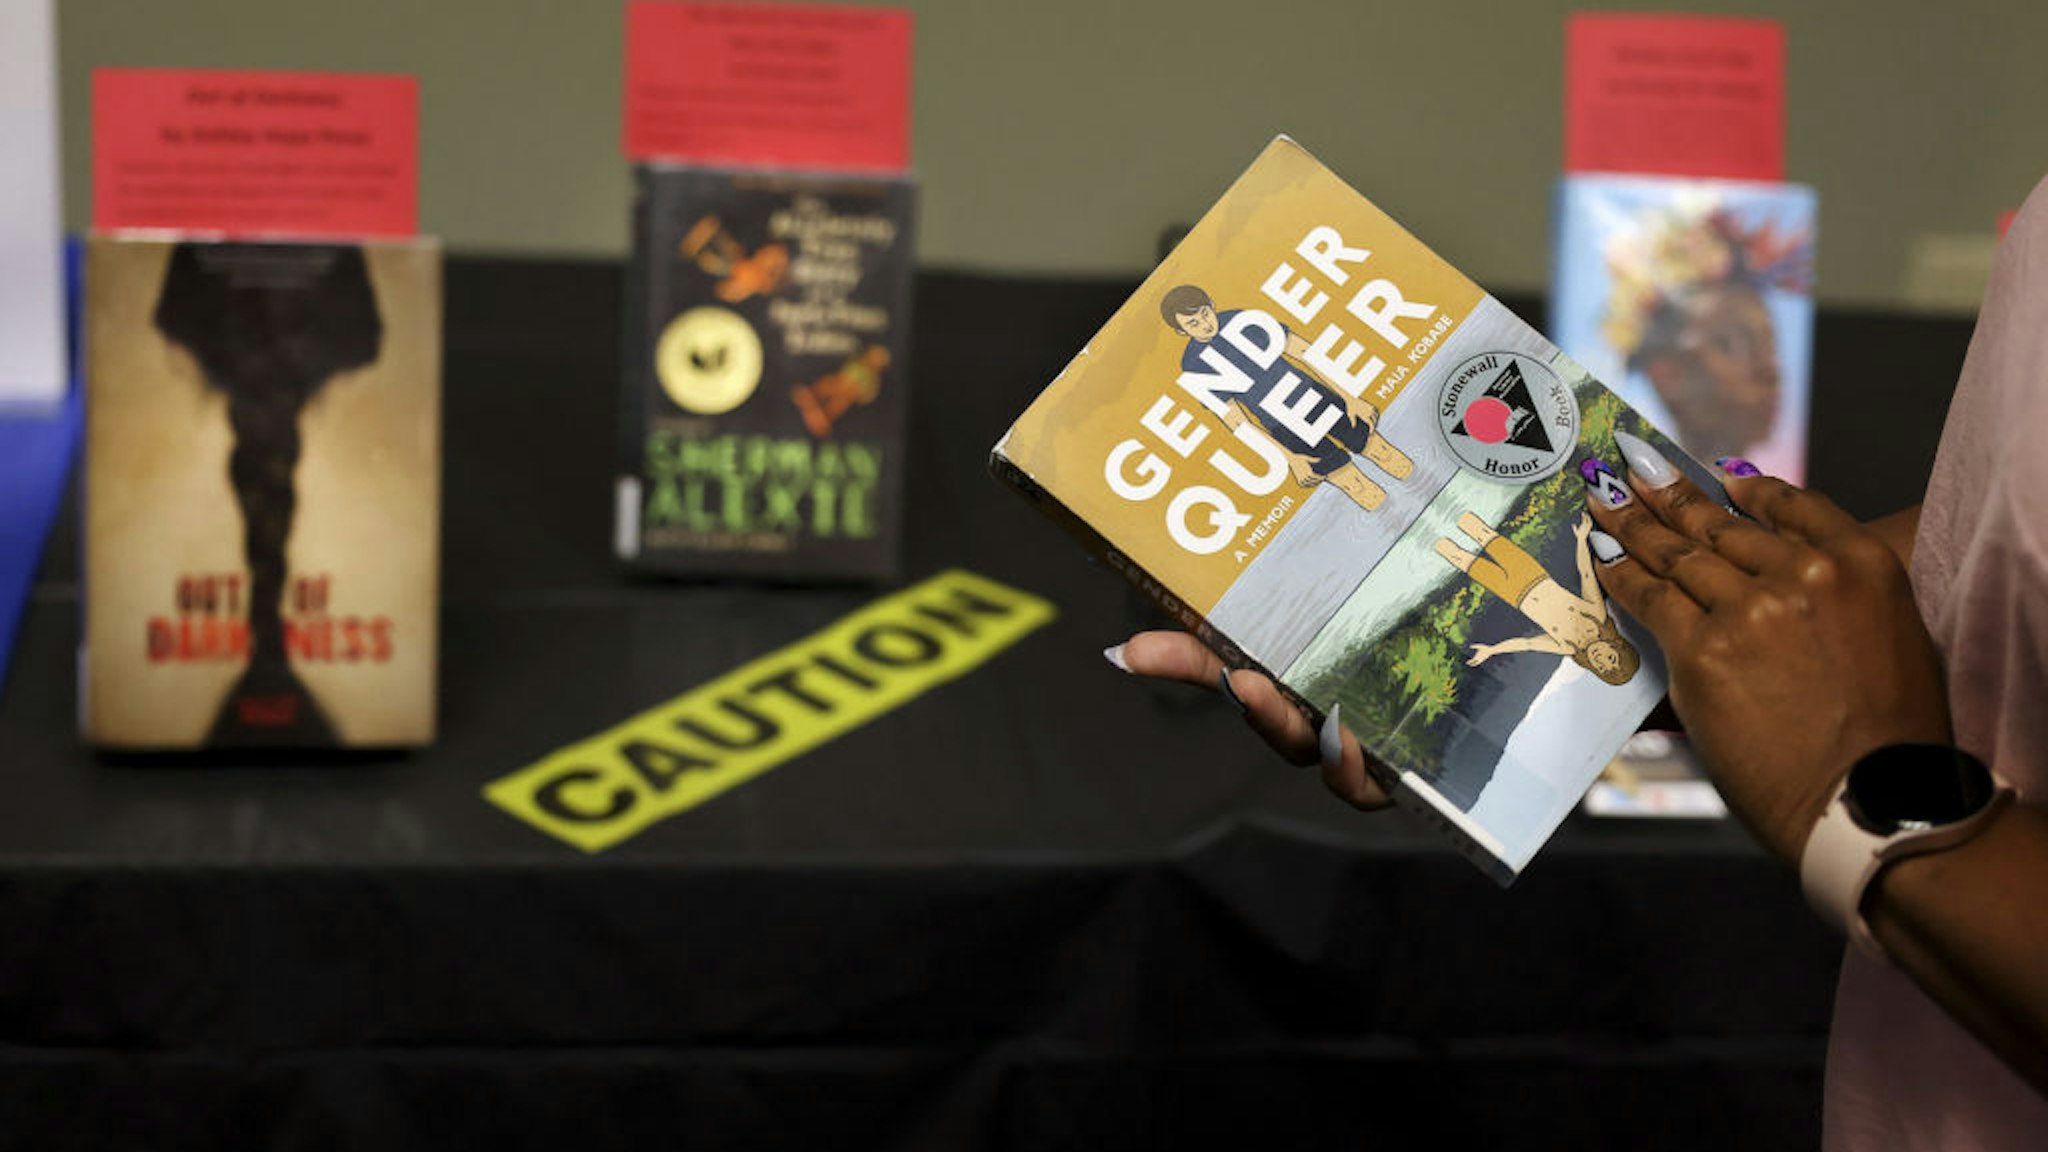 &quot;Gender Queer&quot; by Maia Kobabe is held as a selection of banned and challenged books are seen during Banned Books Week 2022, at the Lincoln Belmont branch of the Chicago Public Library on Sept. 22, 2022. (Chris Sweda/Chicago Tribune/Tribune News Service via Getty Images)